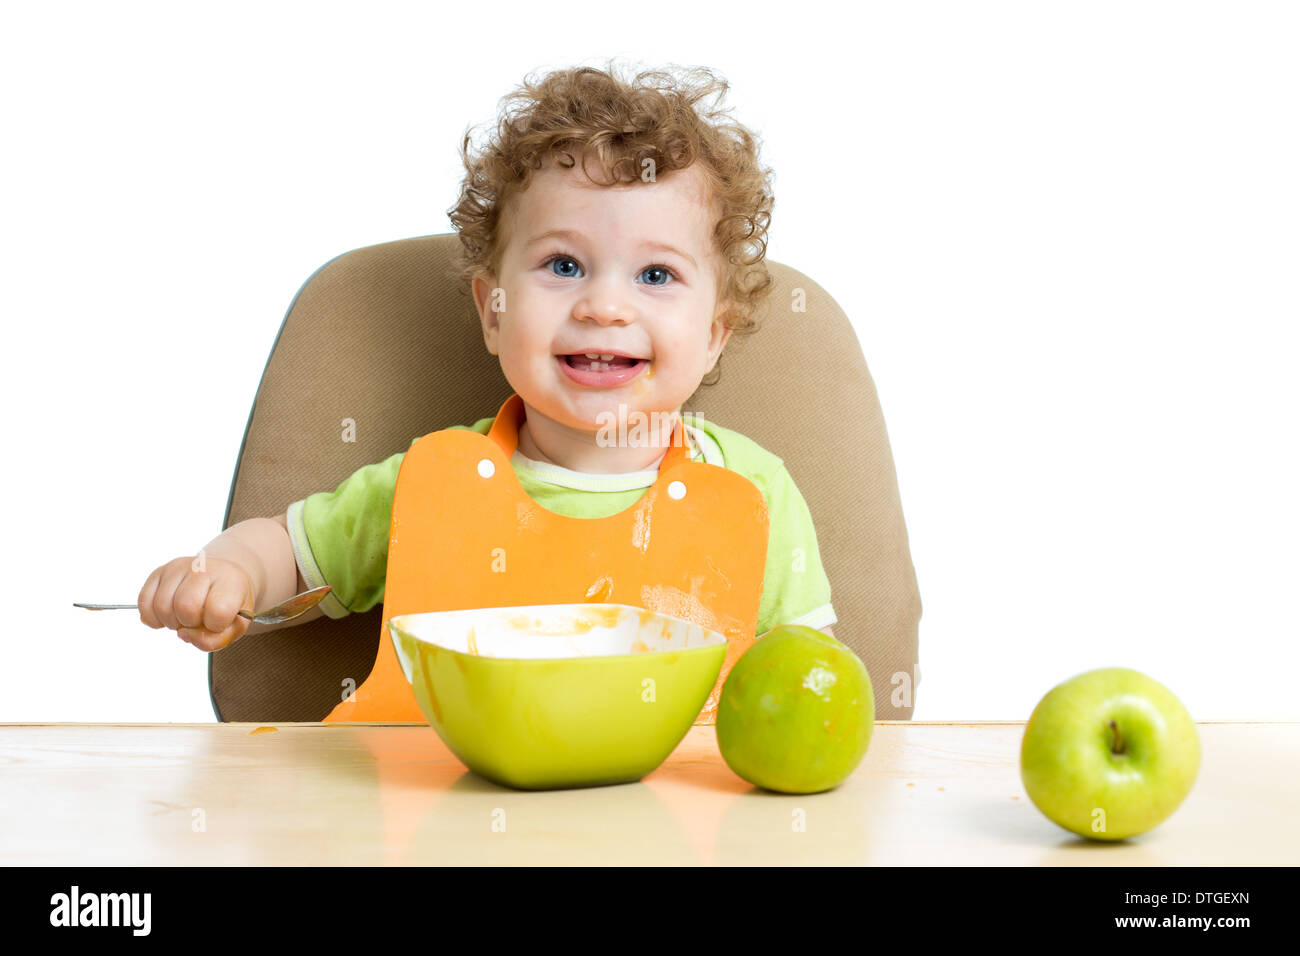 baby eating by himself Stock Photo